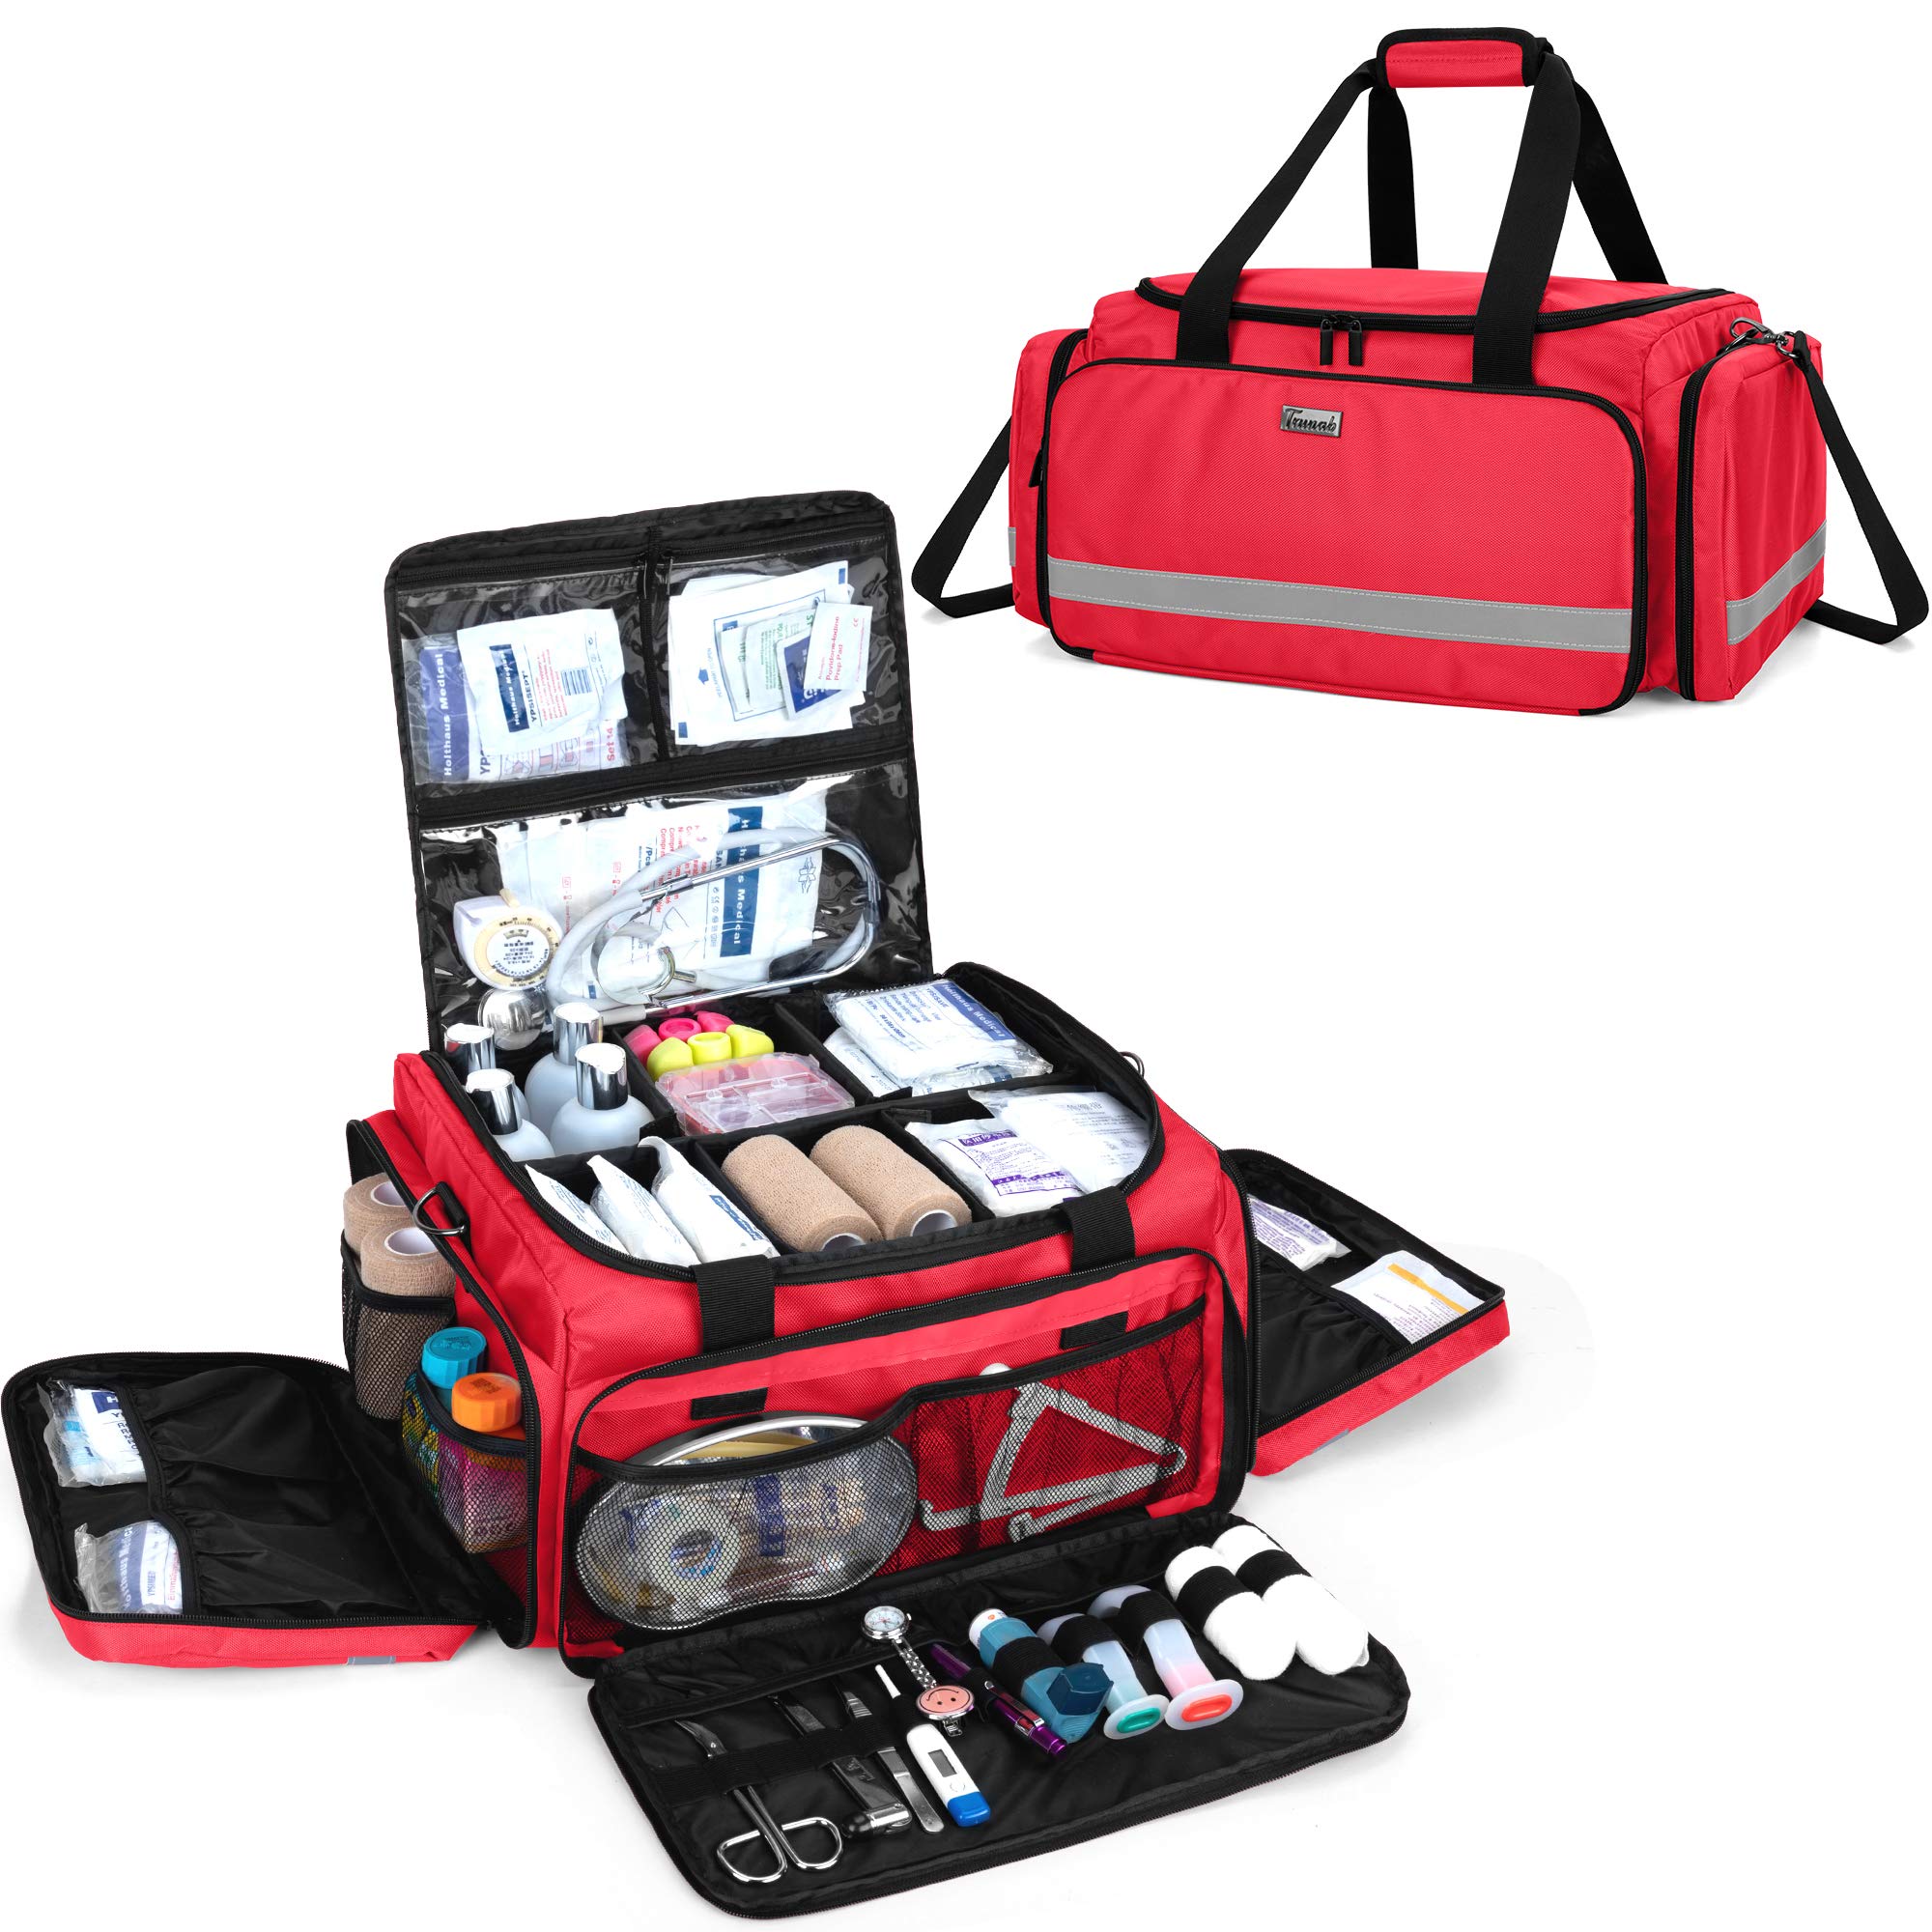 Trunab First Responder Bag Empty, Professional Medical Supplies Bag First Aid Kits Bag with Inner Dividers for Home Health Nurse, Community Care, EMT, EMS, Red, Bag ONLY - Patented Design